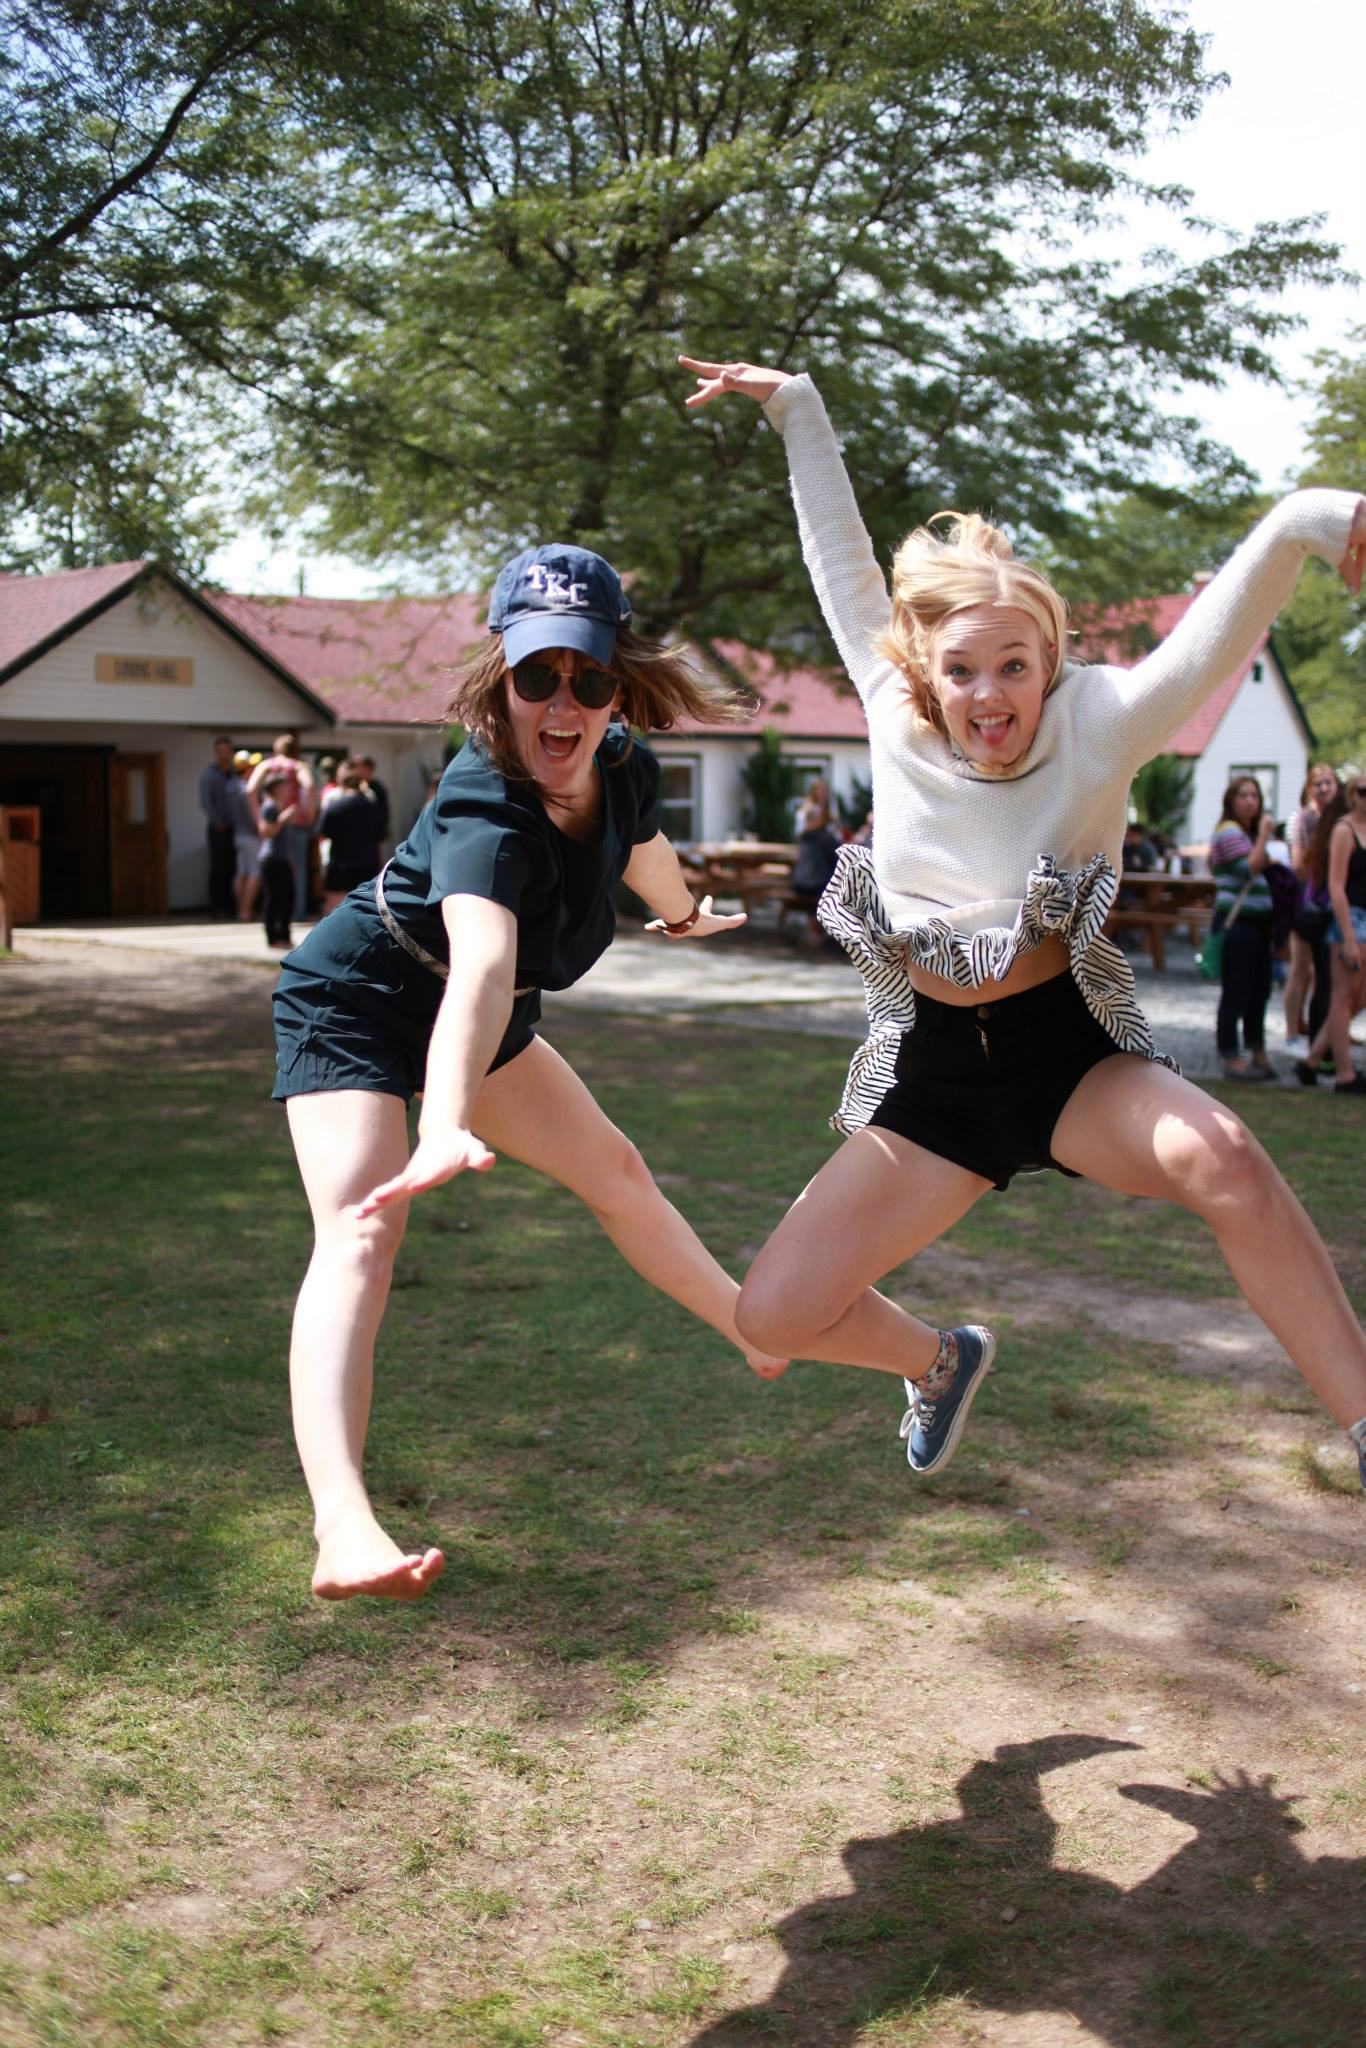 Lucinda Sweazey ('15) and Caley Goins ('14) represent the feelings of fall retreat. Photo by Elise Inman.